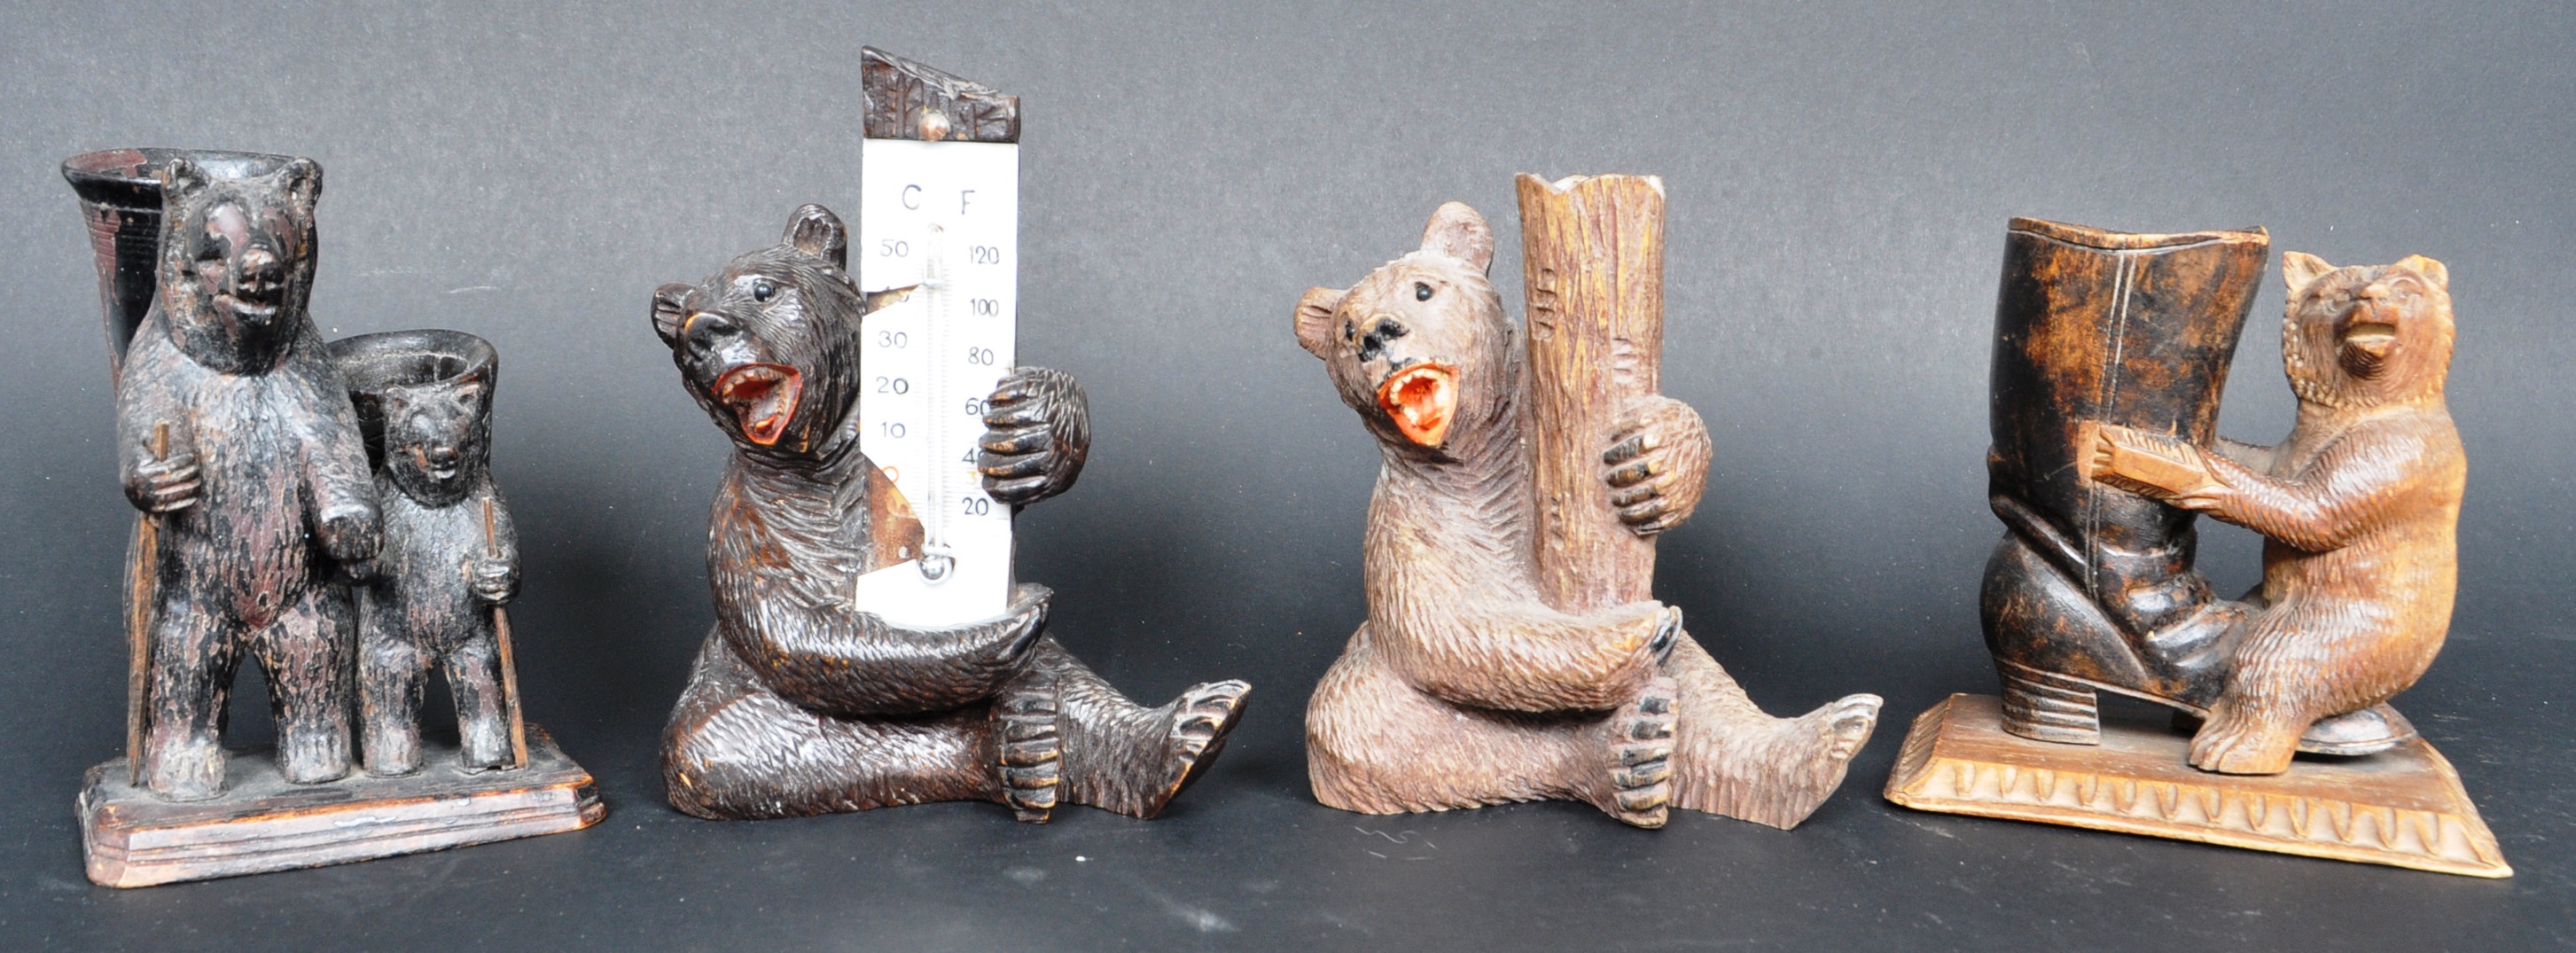 COLLECTION OF FOUR 19TH CENTURY GERMAN BLACK FOREST BEARS